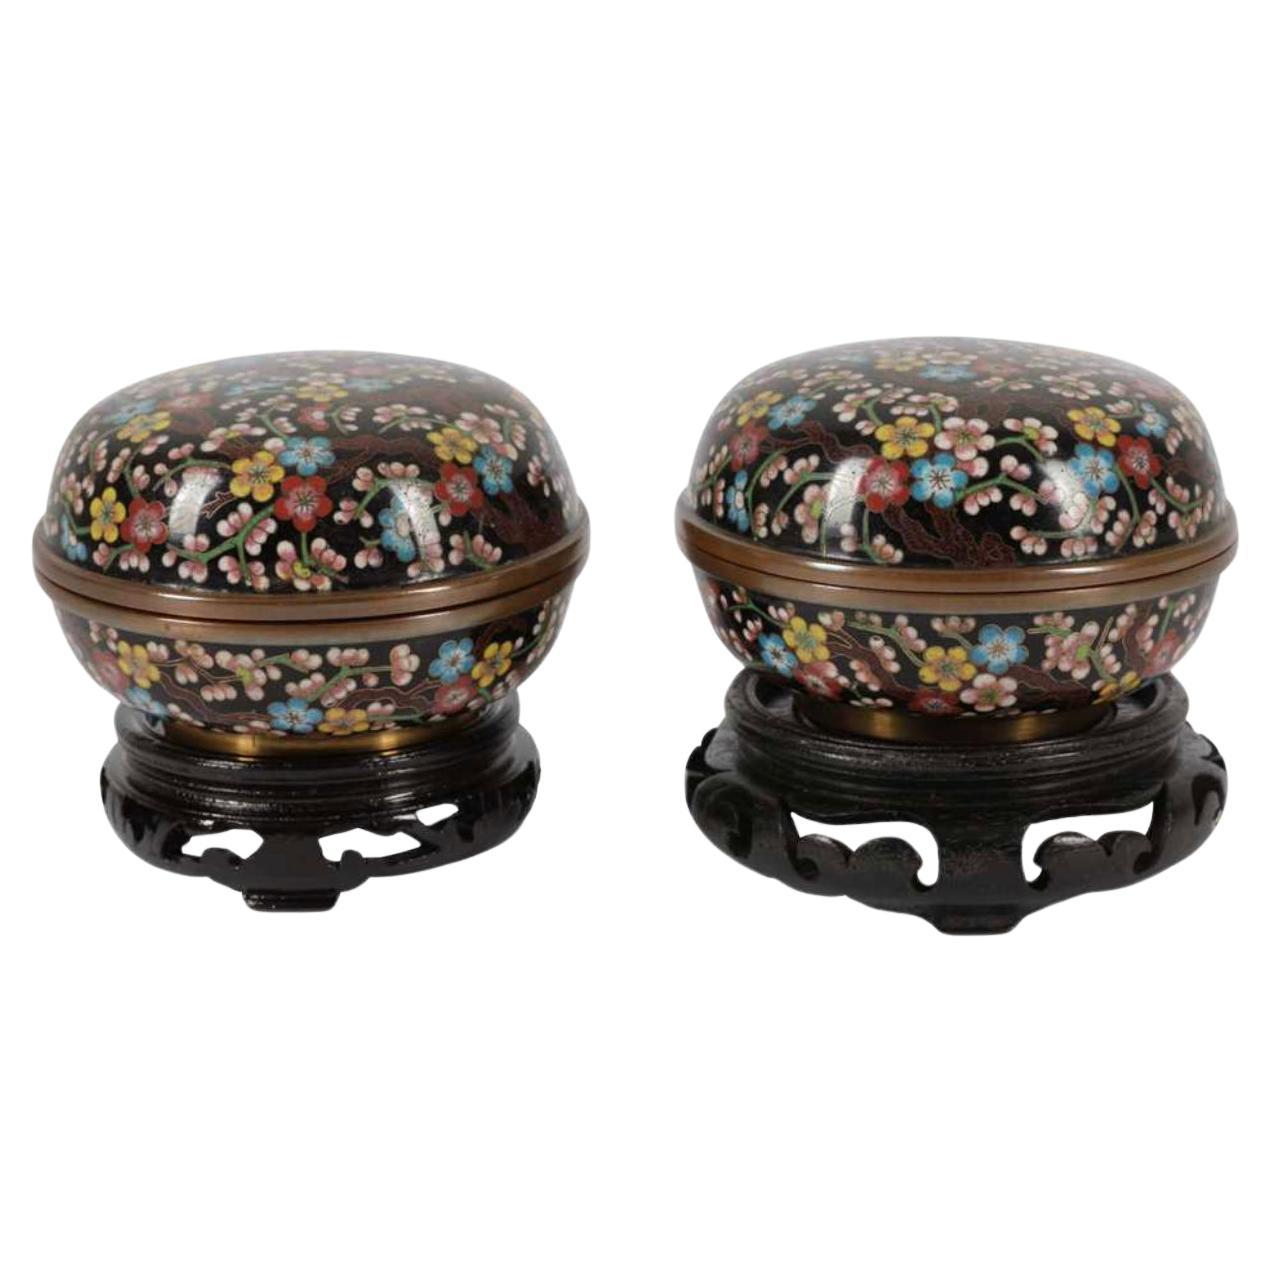 A Magnificent Pair of Japanese Cloisonne Enamel Kogo Boxes and cover. Meiji peri